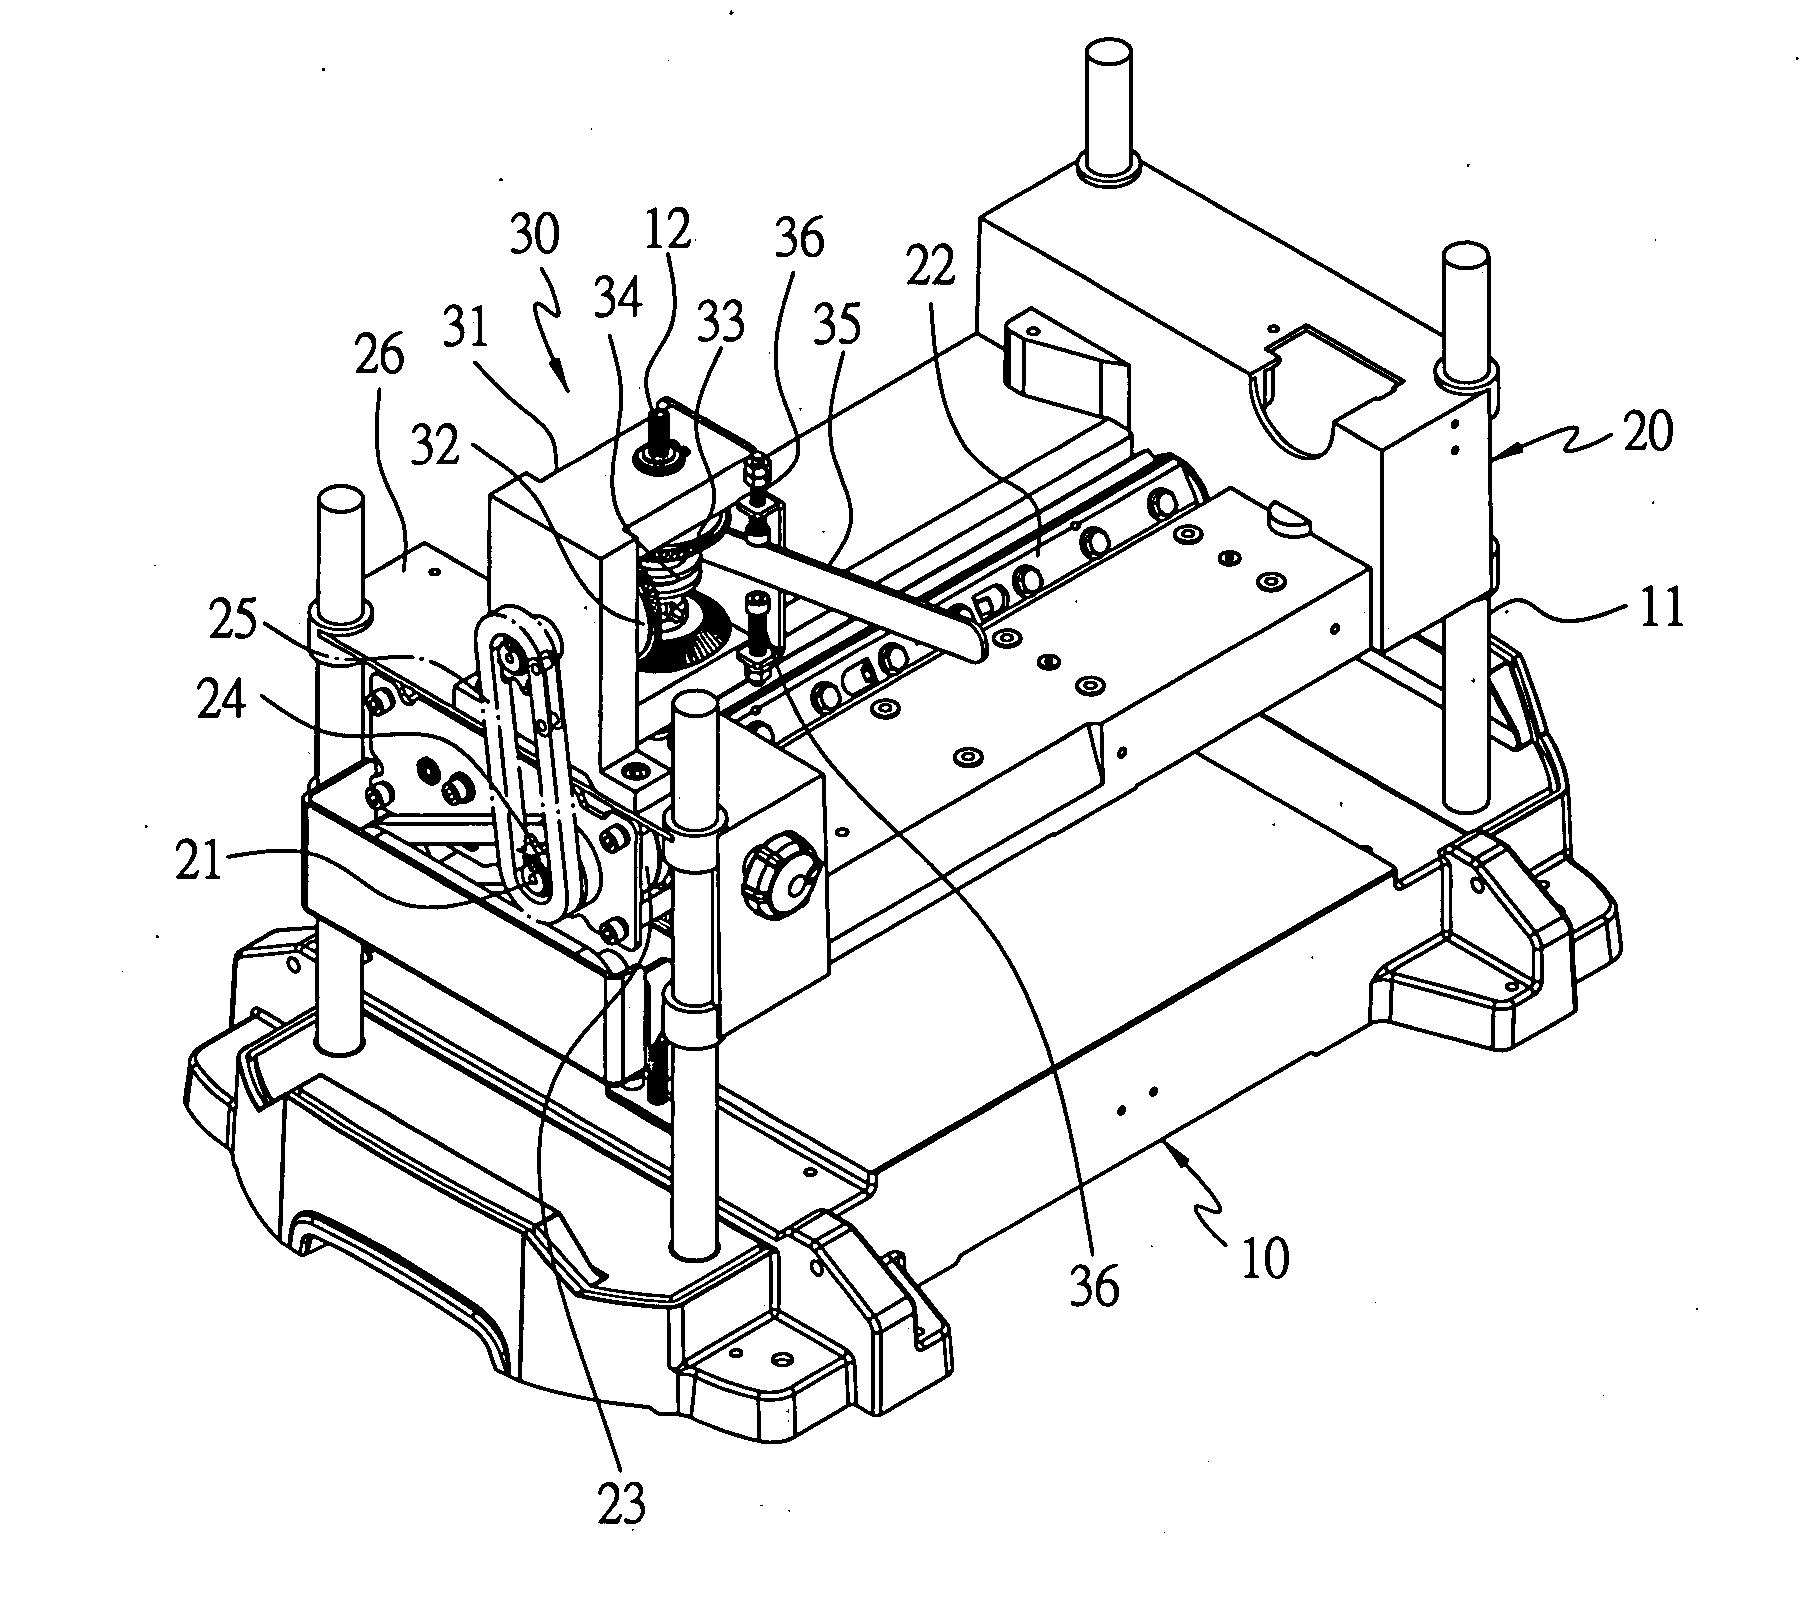 Worktable elevating device for a planer